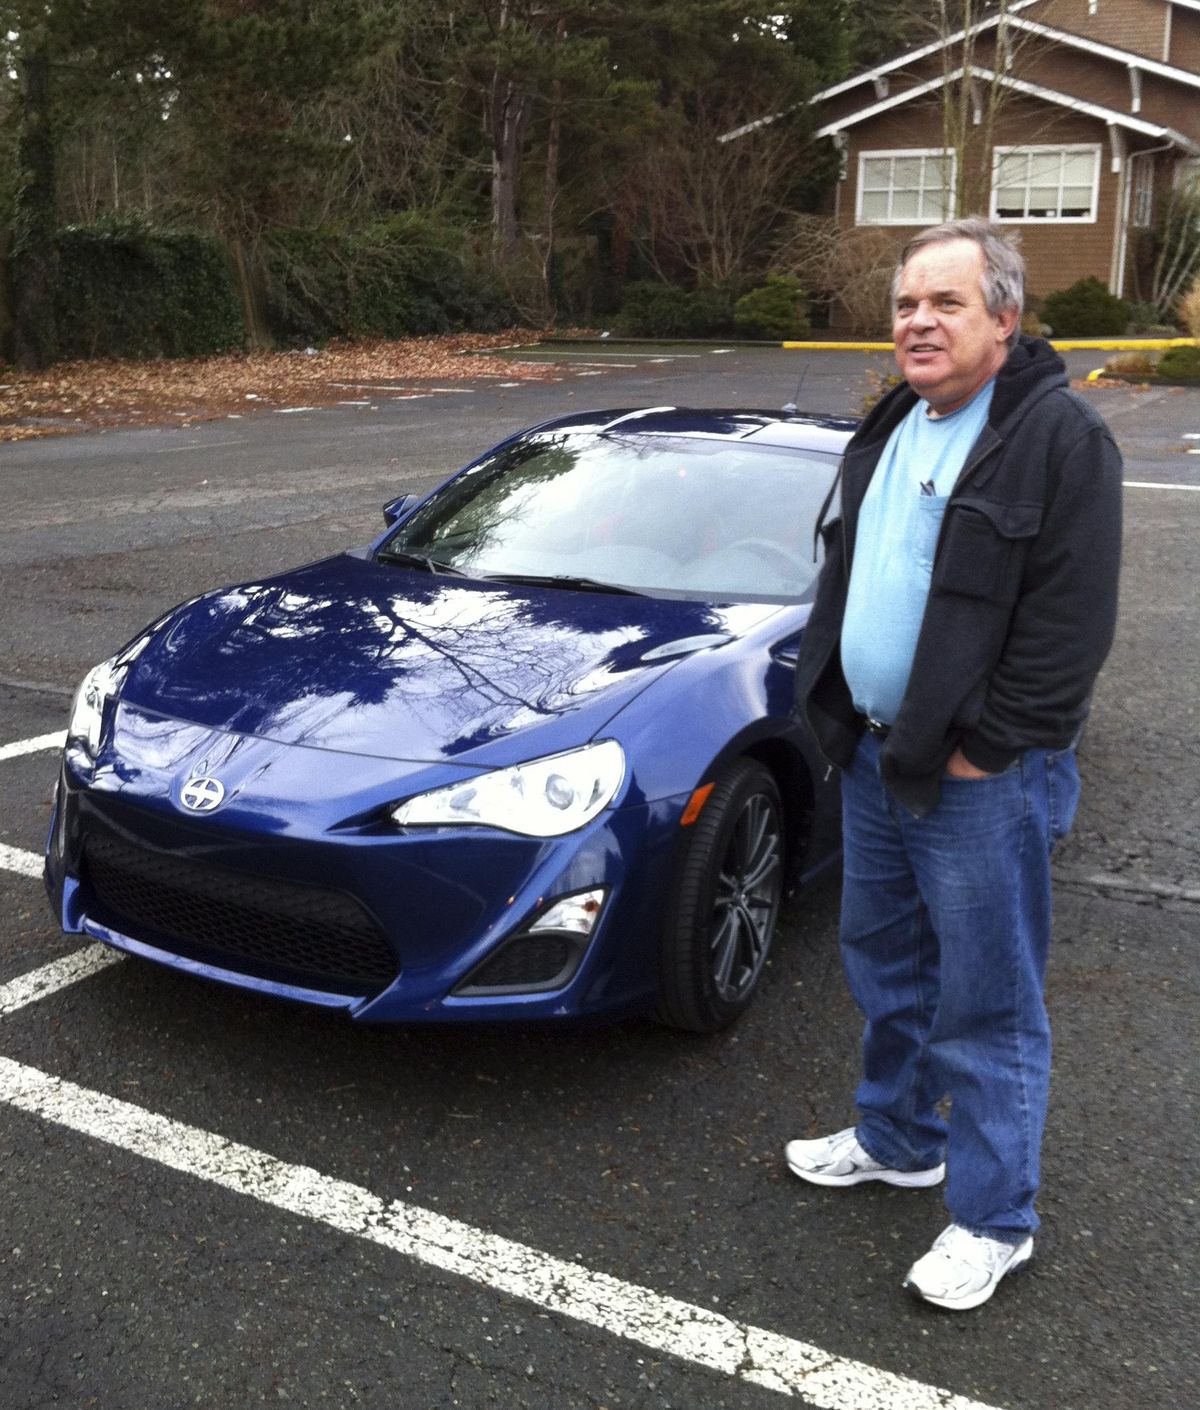 In this Dec. 14, 2013, photo provided by Shashi Karan, Alan Naiman poses with his new car, an unusual extravagance for him, in Seattle. When Naiman, a Washington state social worker, died this year of cancer at the age of 63, the generous loner left most of his surprise estate worth $11 million to children’s charities helping the poor, sick, disabled, abandoned and those otherwise stuck in foster care, unbeknownst to those beneficiaries or his own loved ones. (Shashi Karan / AP)